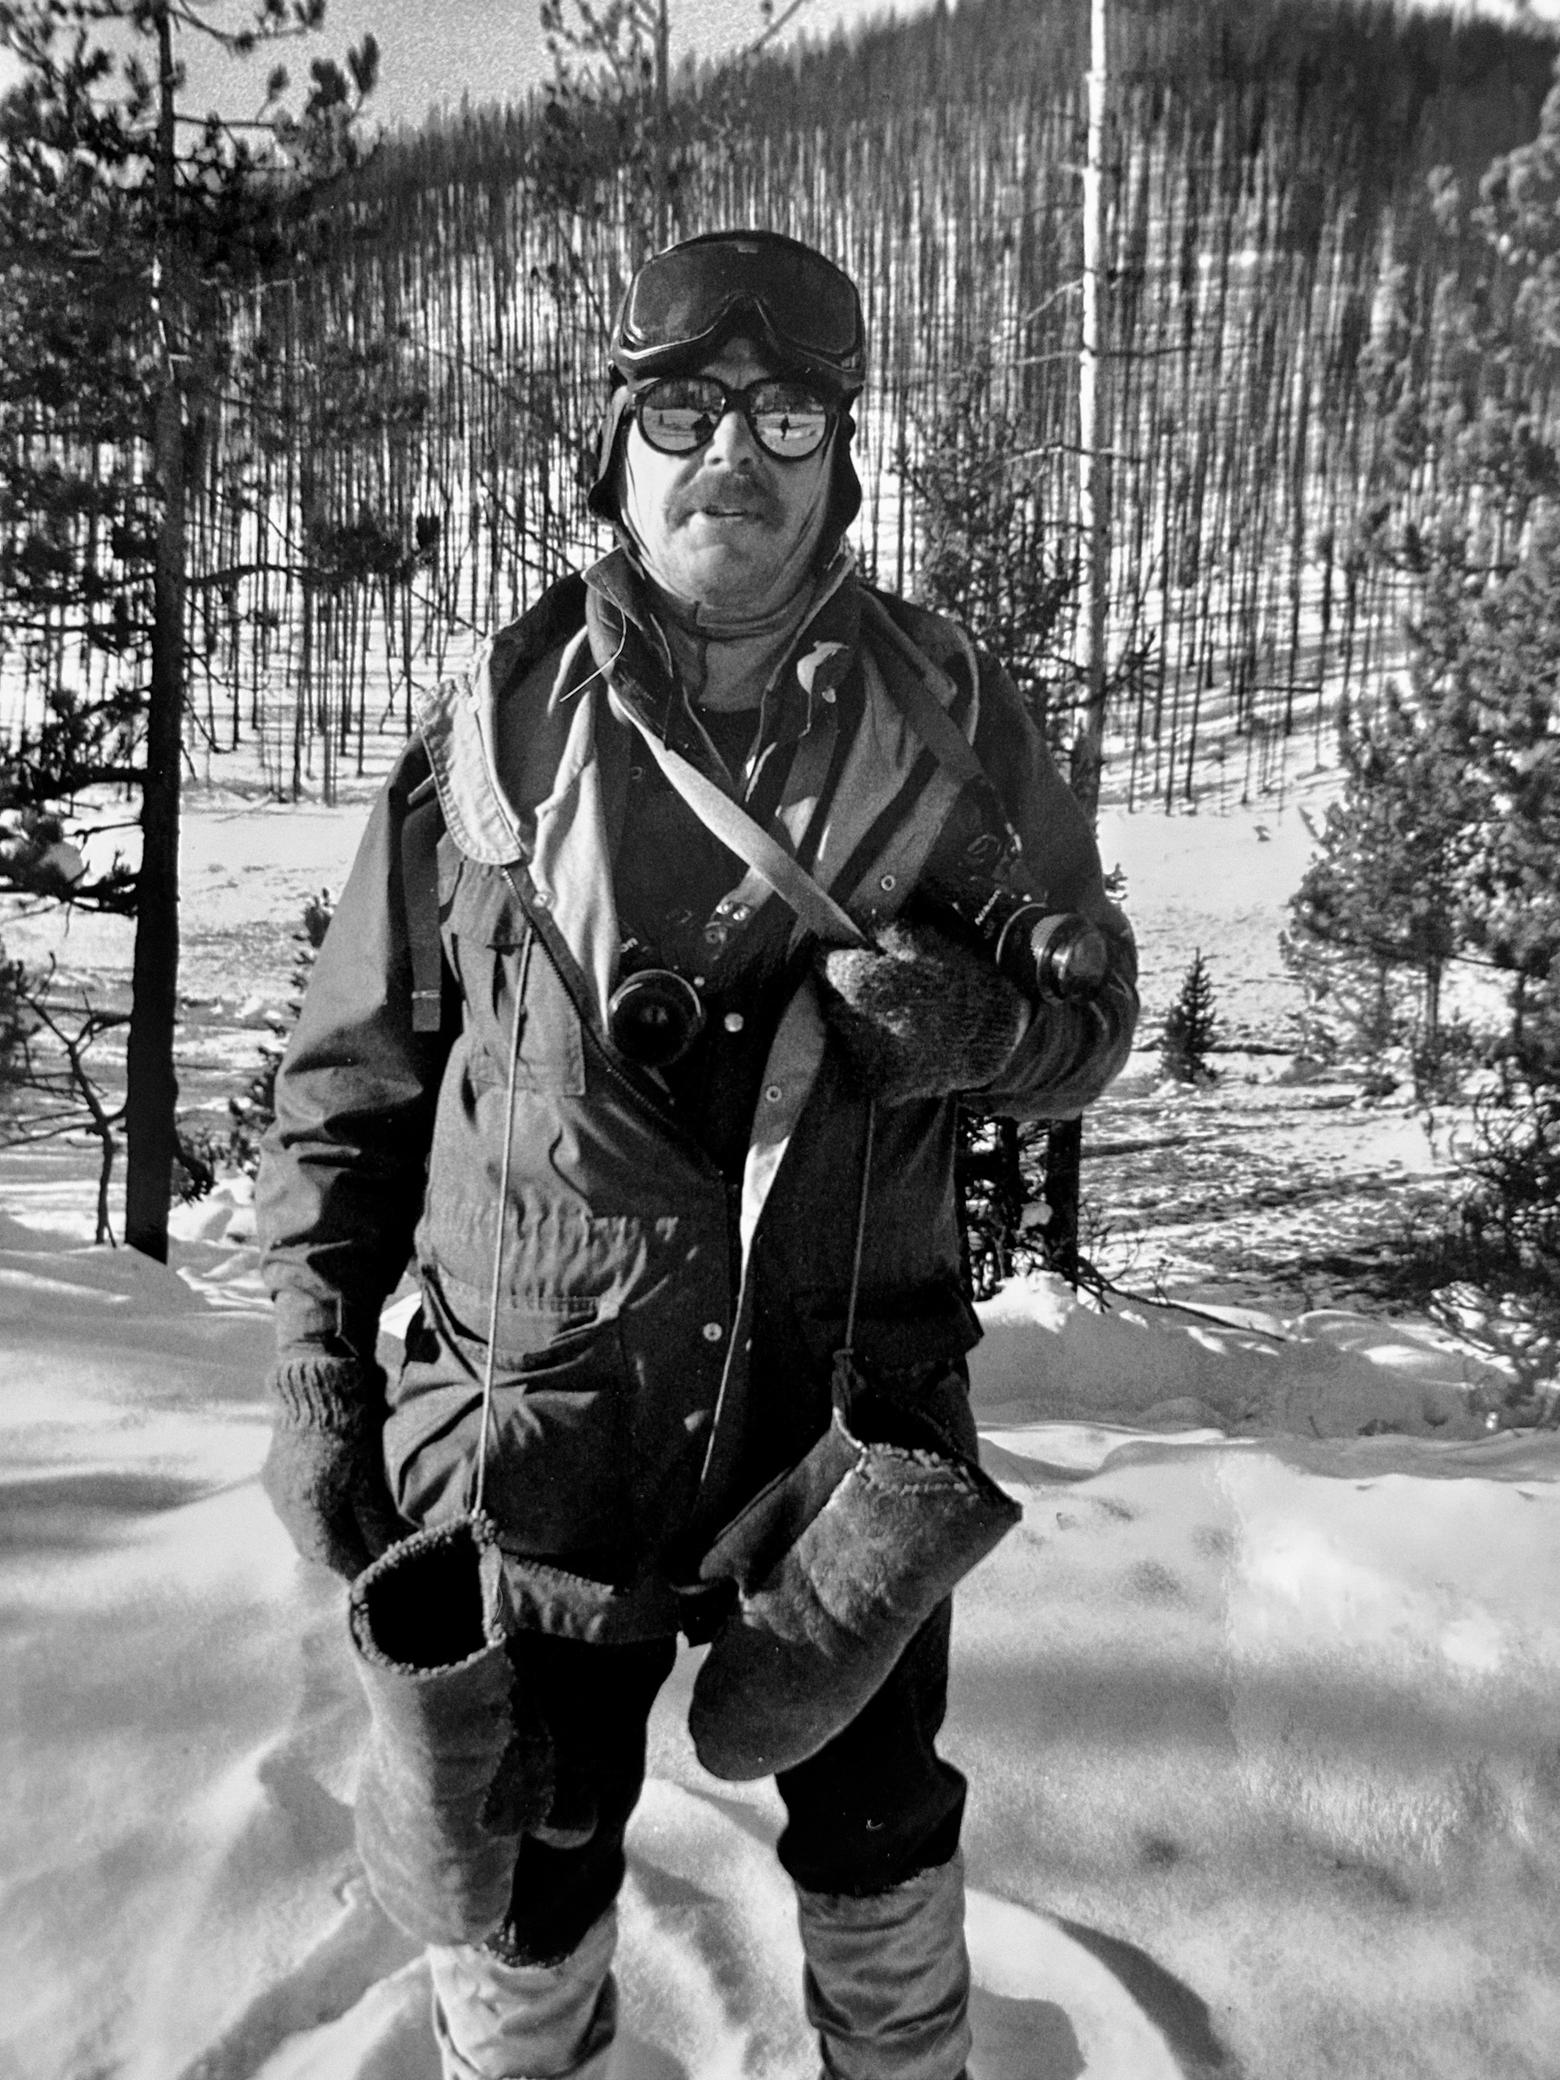 Not your average snowmobile attire yet fashionable for the time: winterkeeper Steve Fuller looks more like a WWII bomber pilot or Arctic explorer. Never without a camera, here he makes a pit stop at Roaring Mountain on his way back to Canyon from Mammoth Hot Springs via snowmobile in January 1989. The lodgepole pine forest behind him had burned only a few months earlier during the historic 1988 Yellowstone fires. The ambient temperature on that day was minus 25 degrees F. Photo by Todd Wilkinson